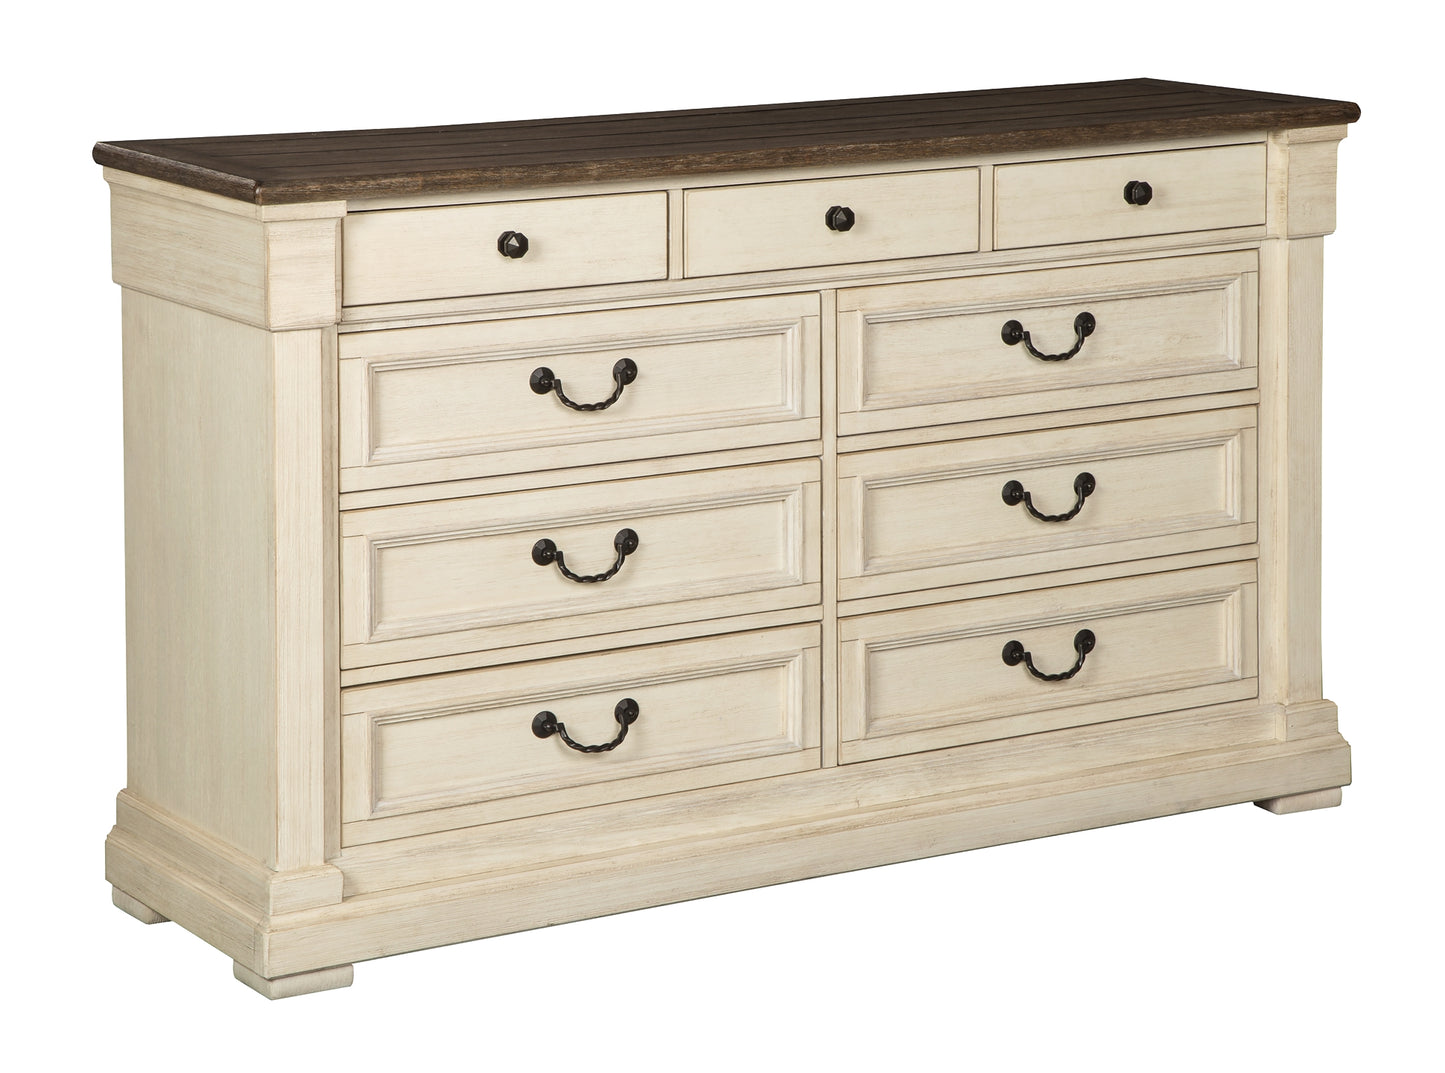 Bolanburg King Panel Bed with Dresser Signature Design by Ashley®